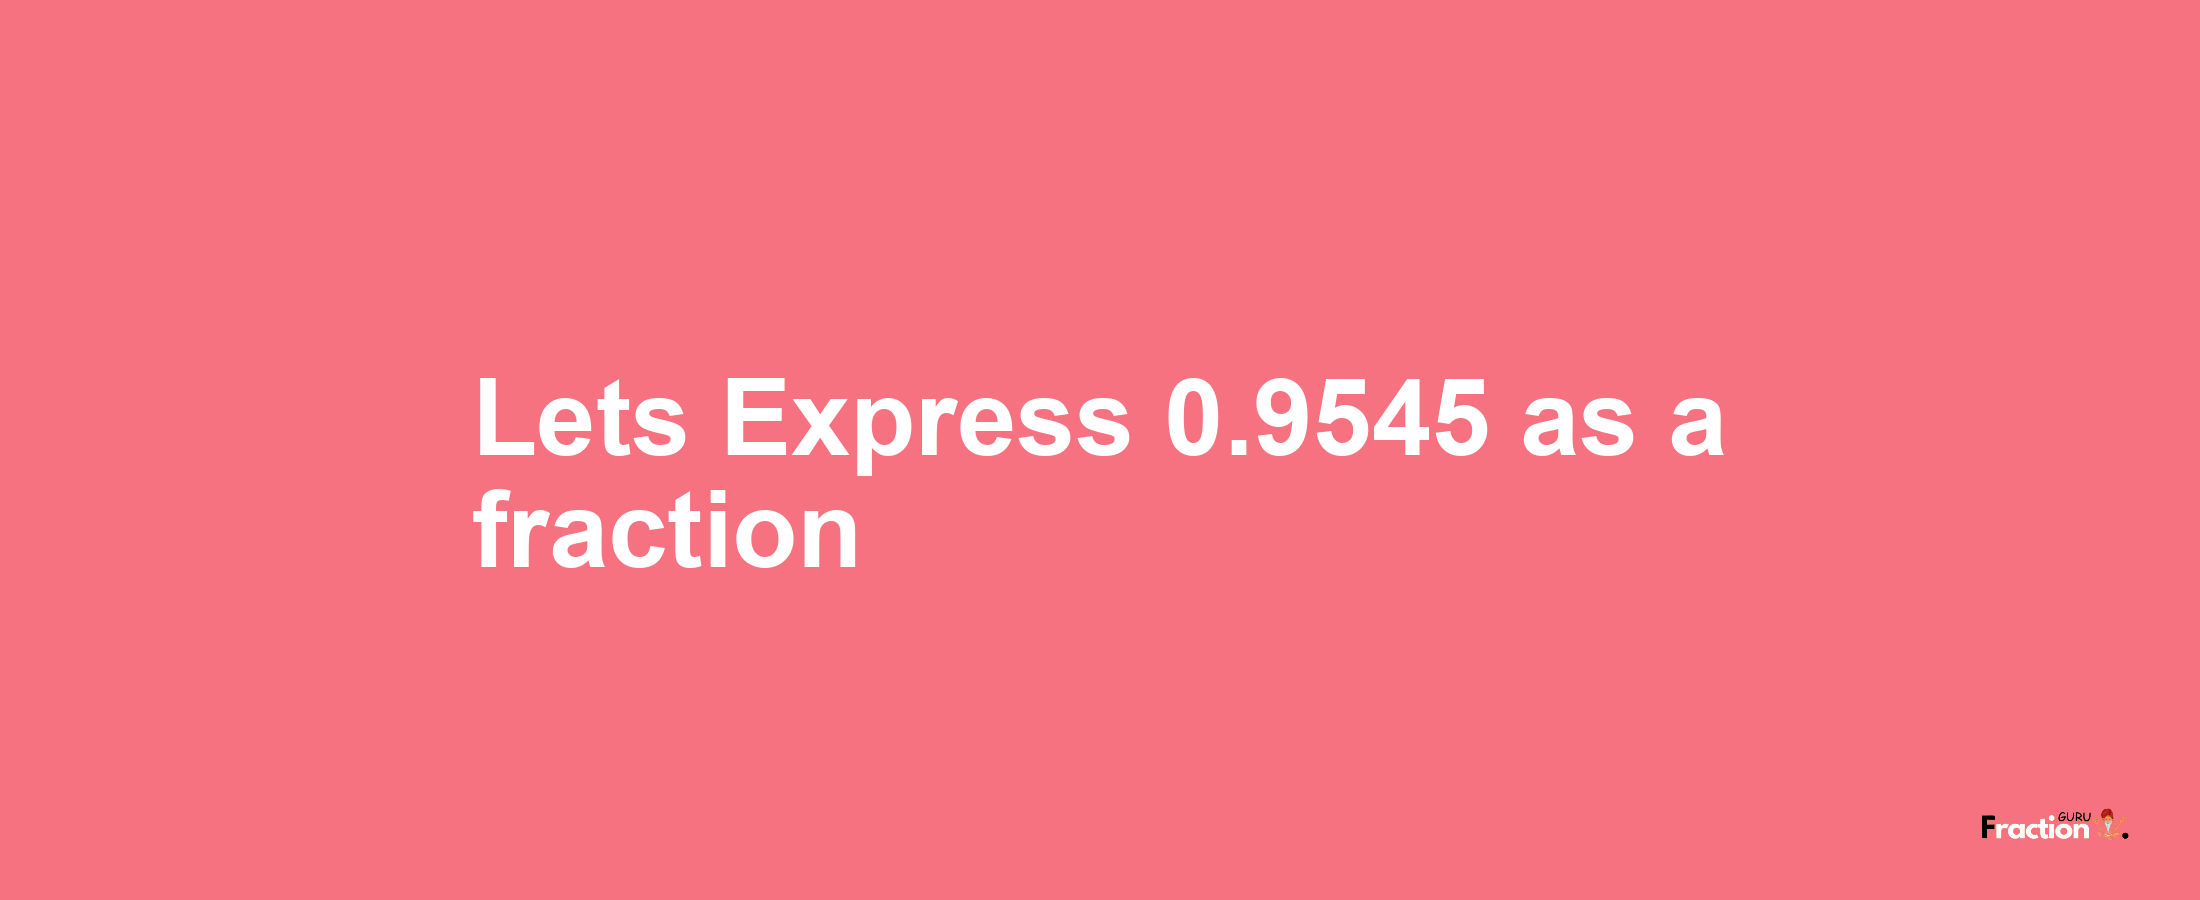 Lets Express 0.9545 as afraction